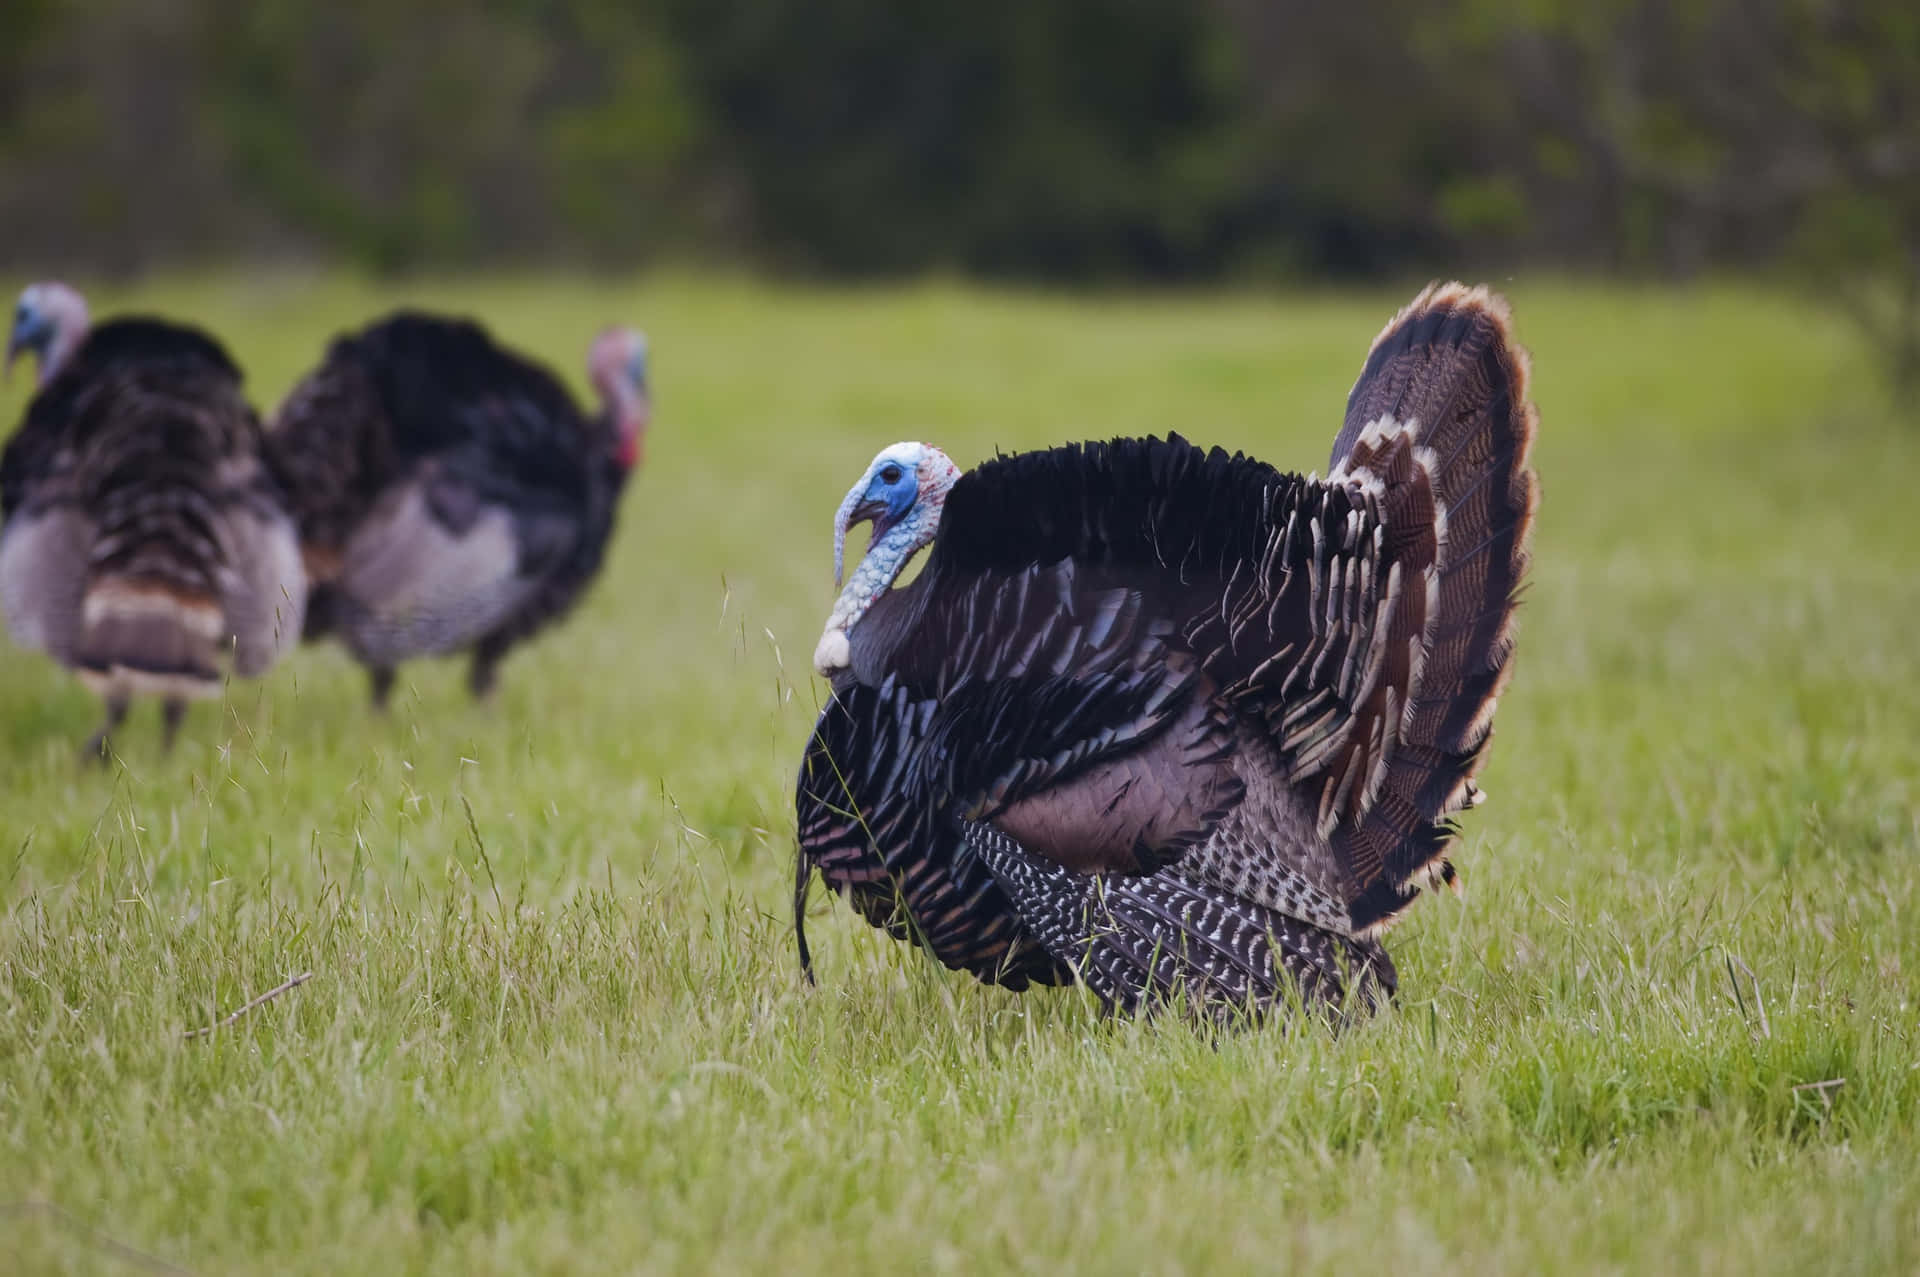 Turkeys In A Field With Grass And Trees